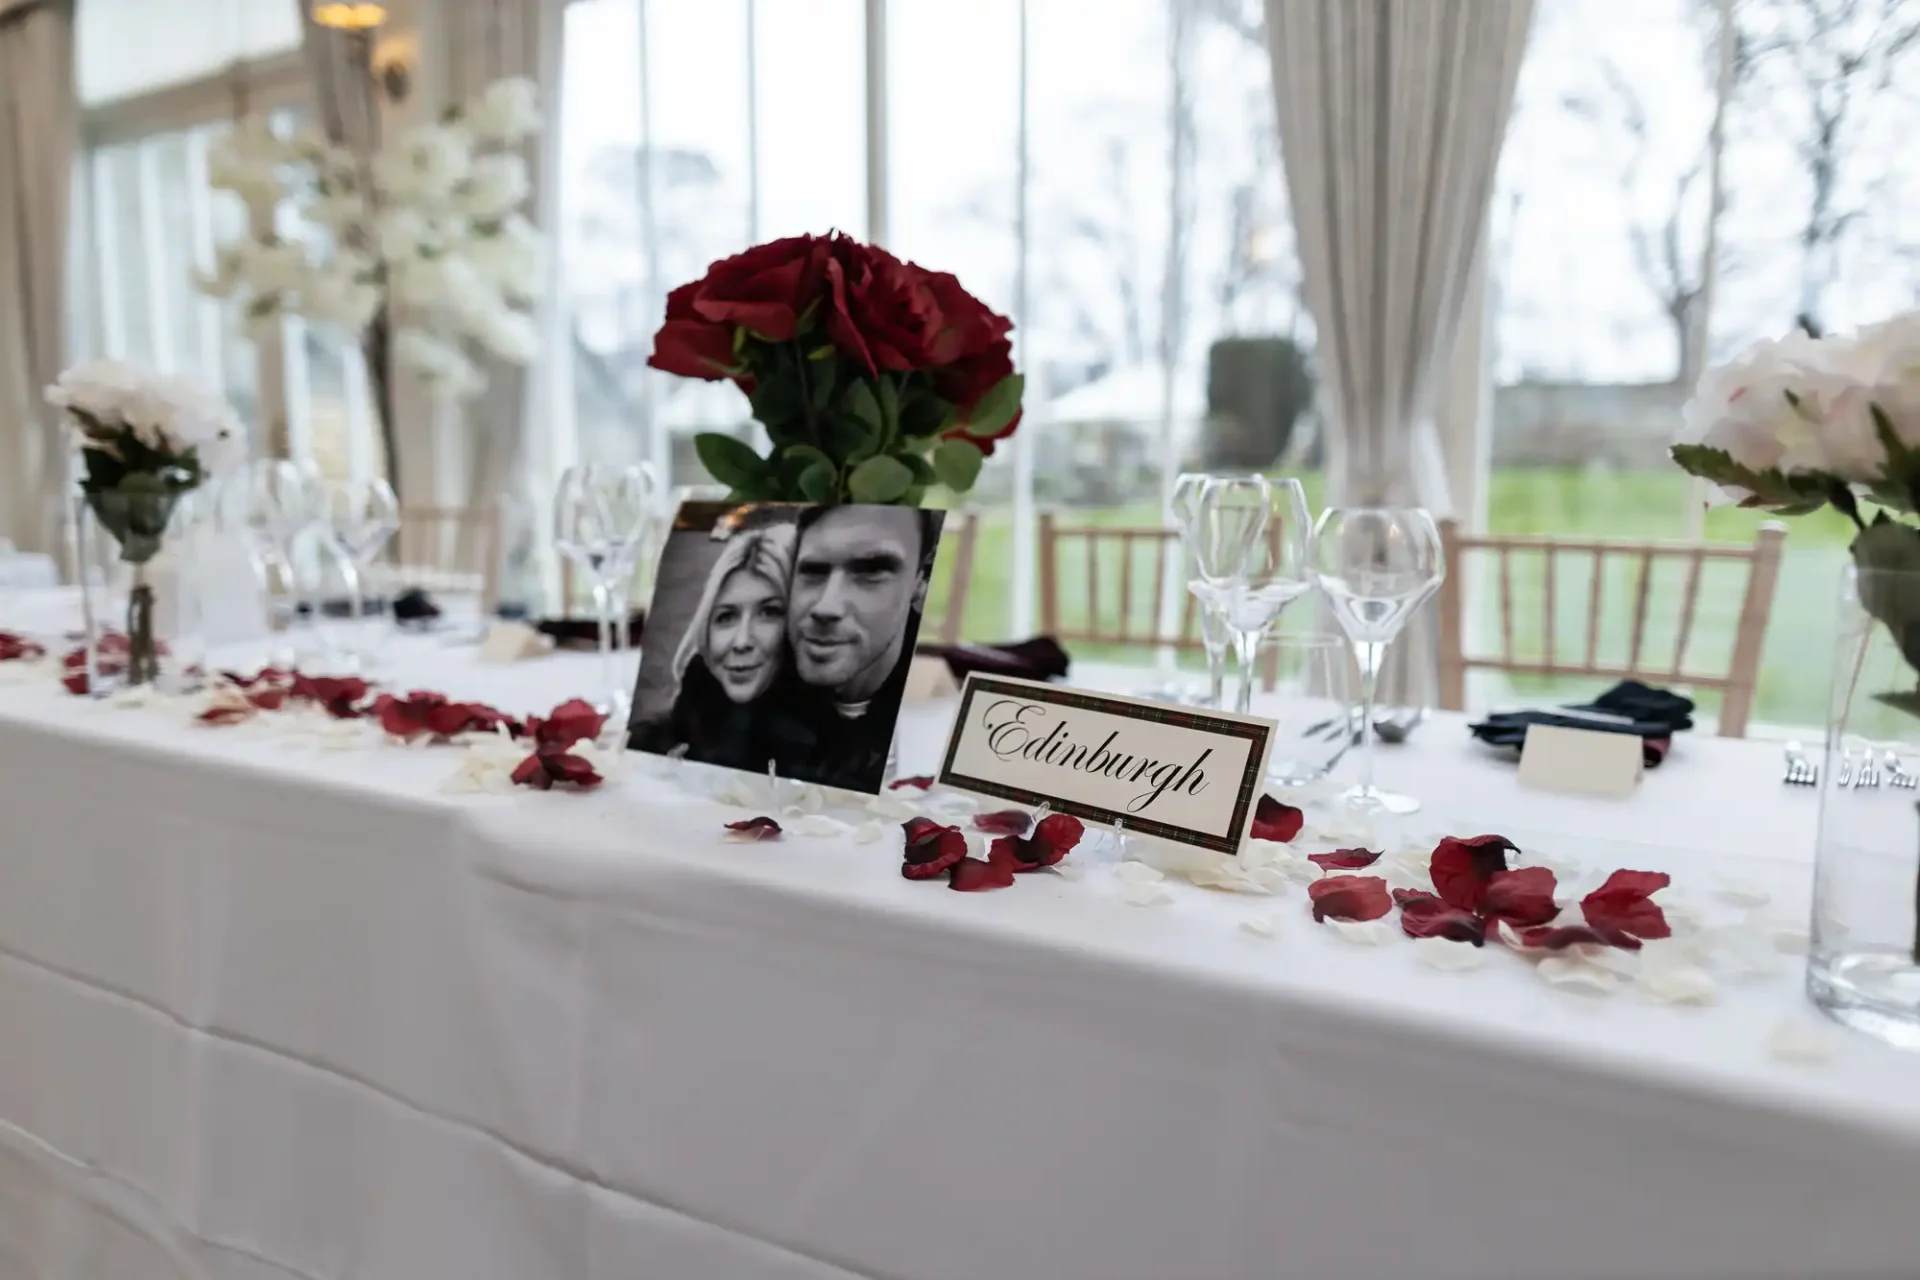 Decorated wedding reception table with a photo of a couple, red roses, scattered petals, and a table sign reading "edinburgh".